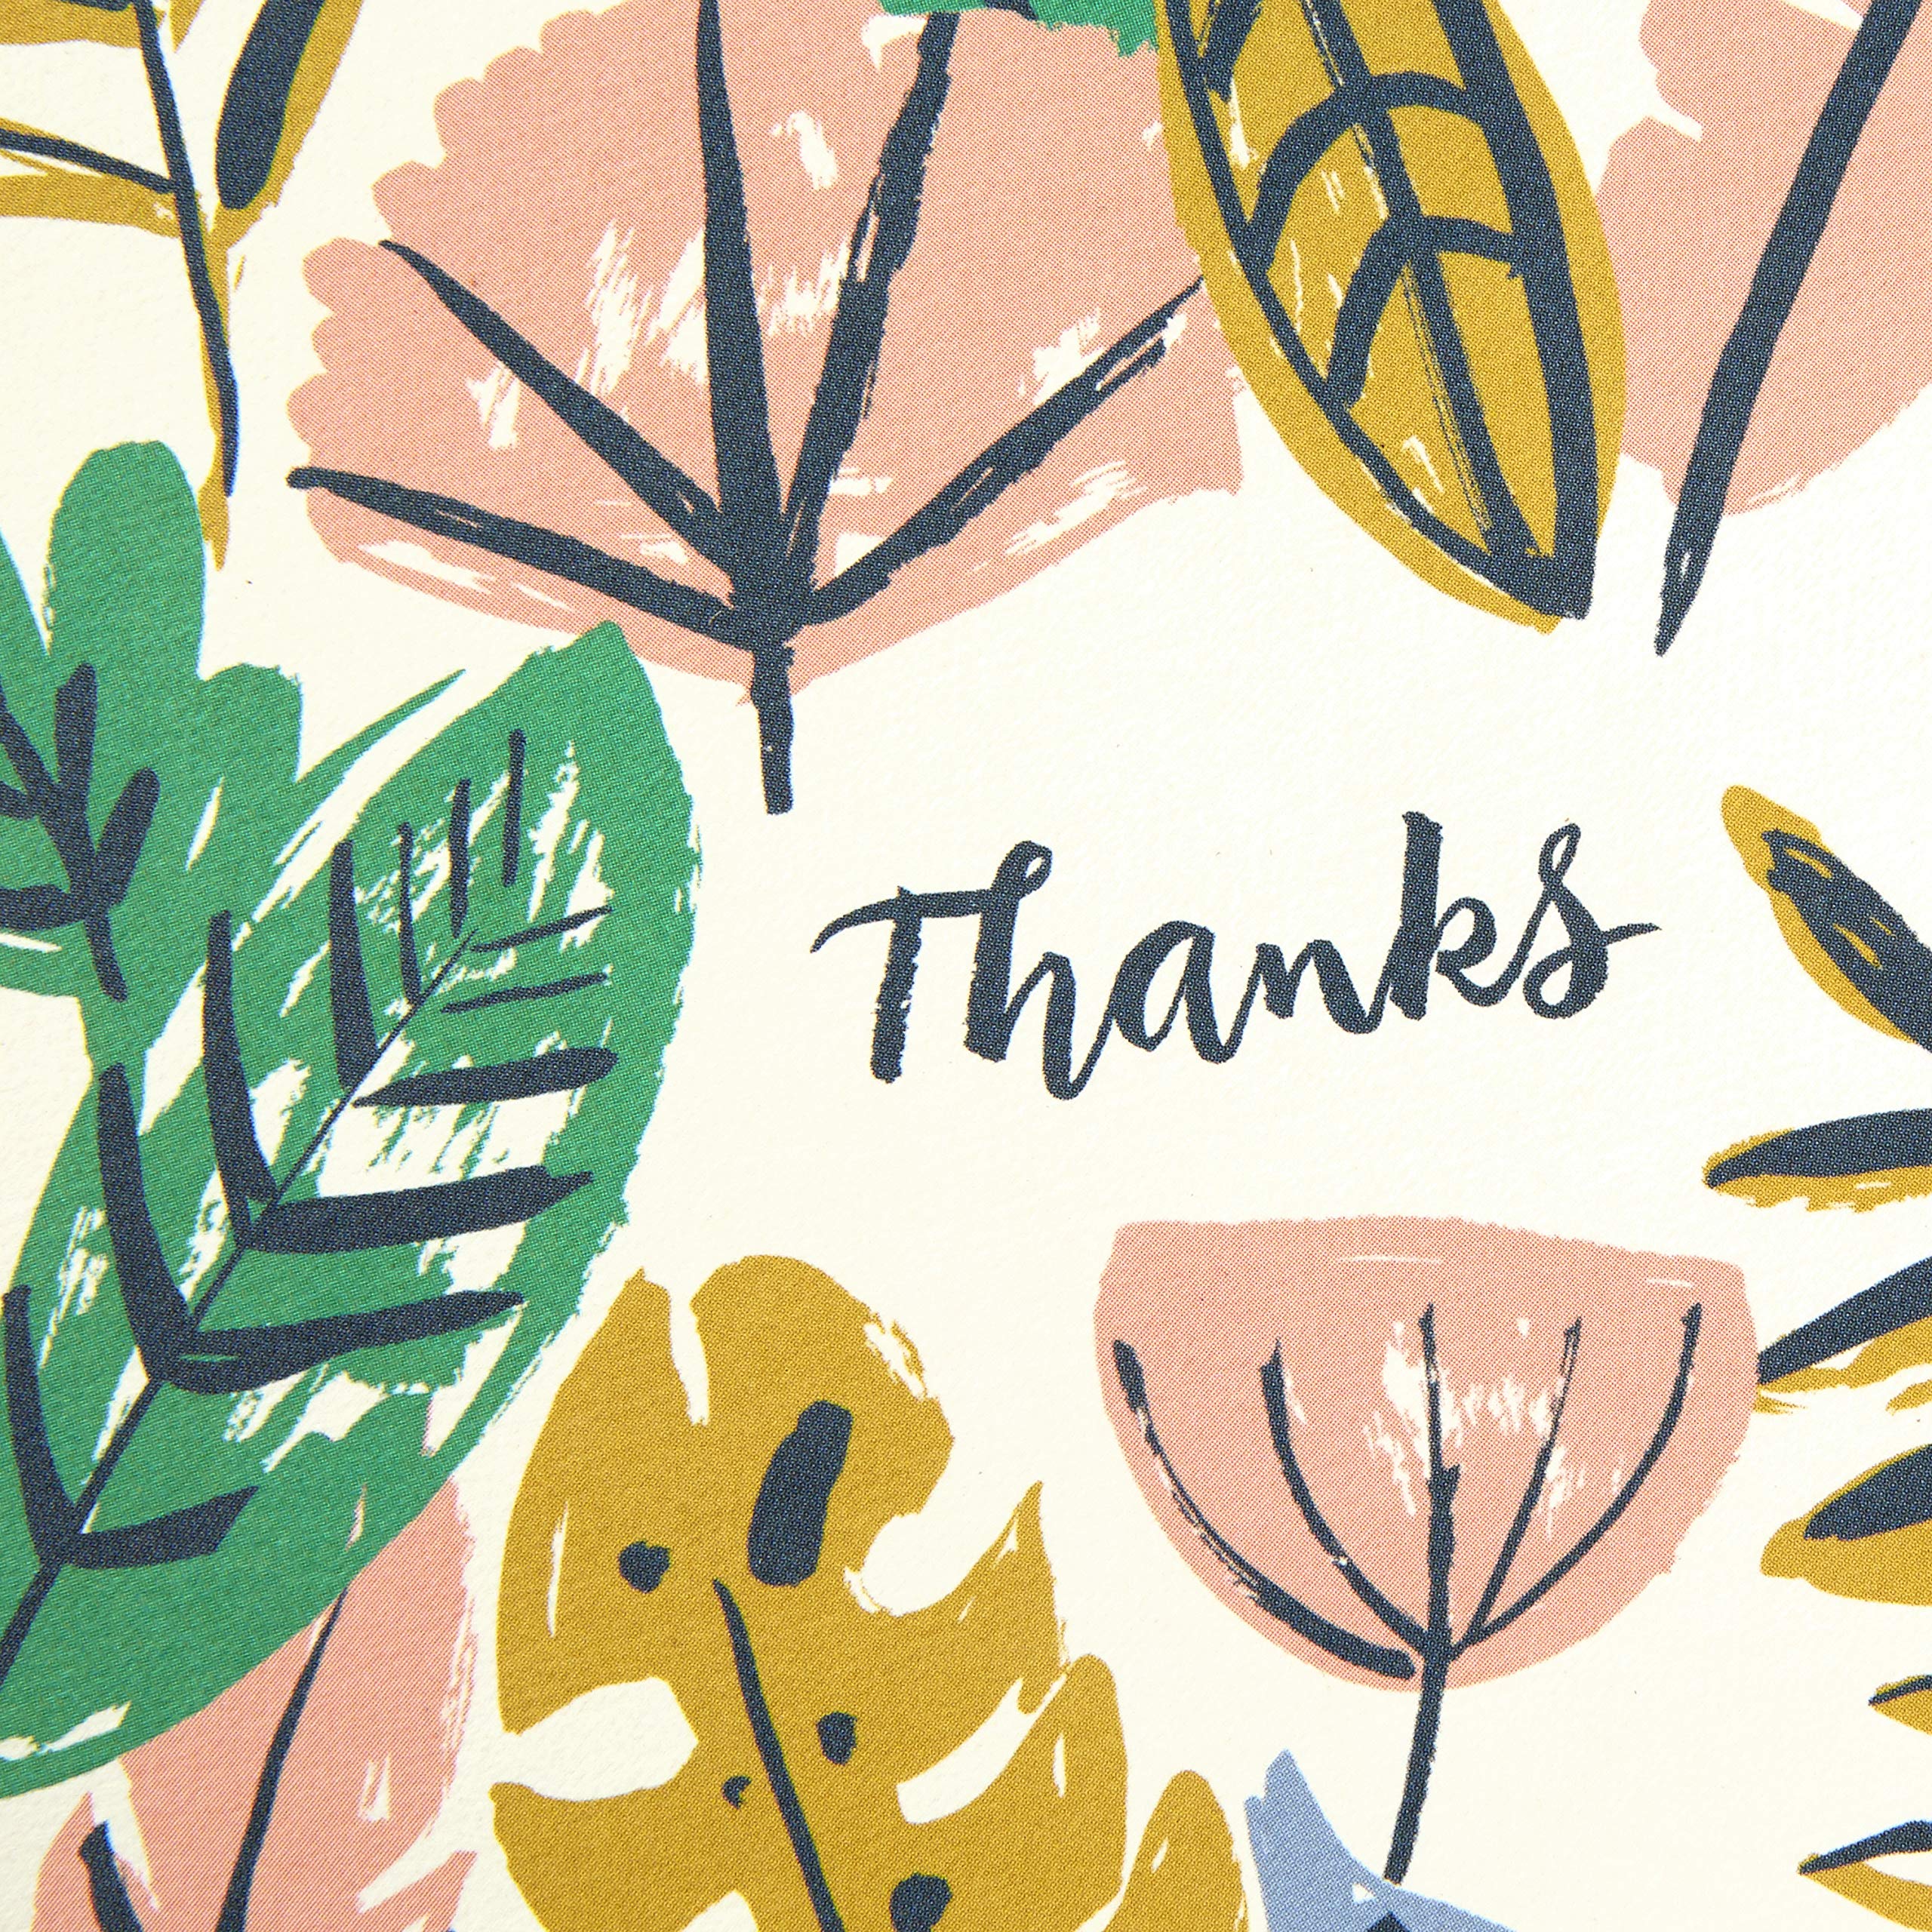 Hallmark Thank You Cards Assortment, Painted Florals (48 Cards with Envelopes for Baby Showers, Bridal Showers, Weddings, All Occasion)